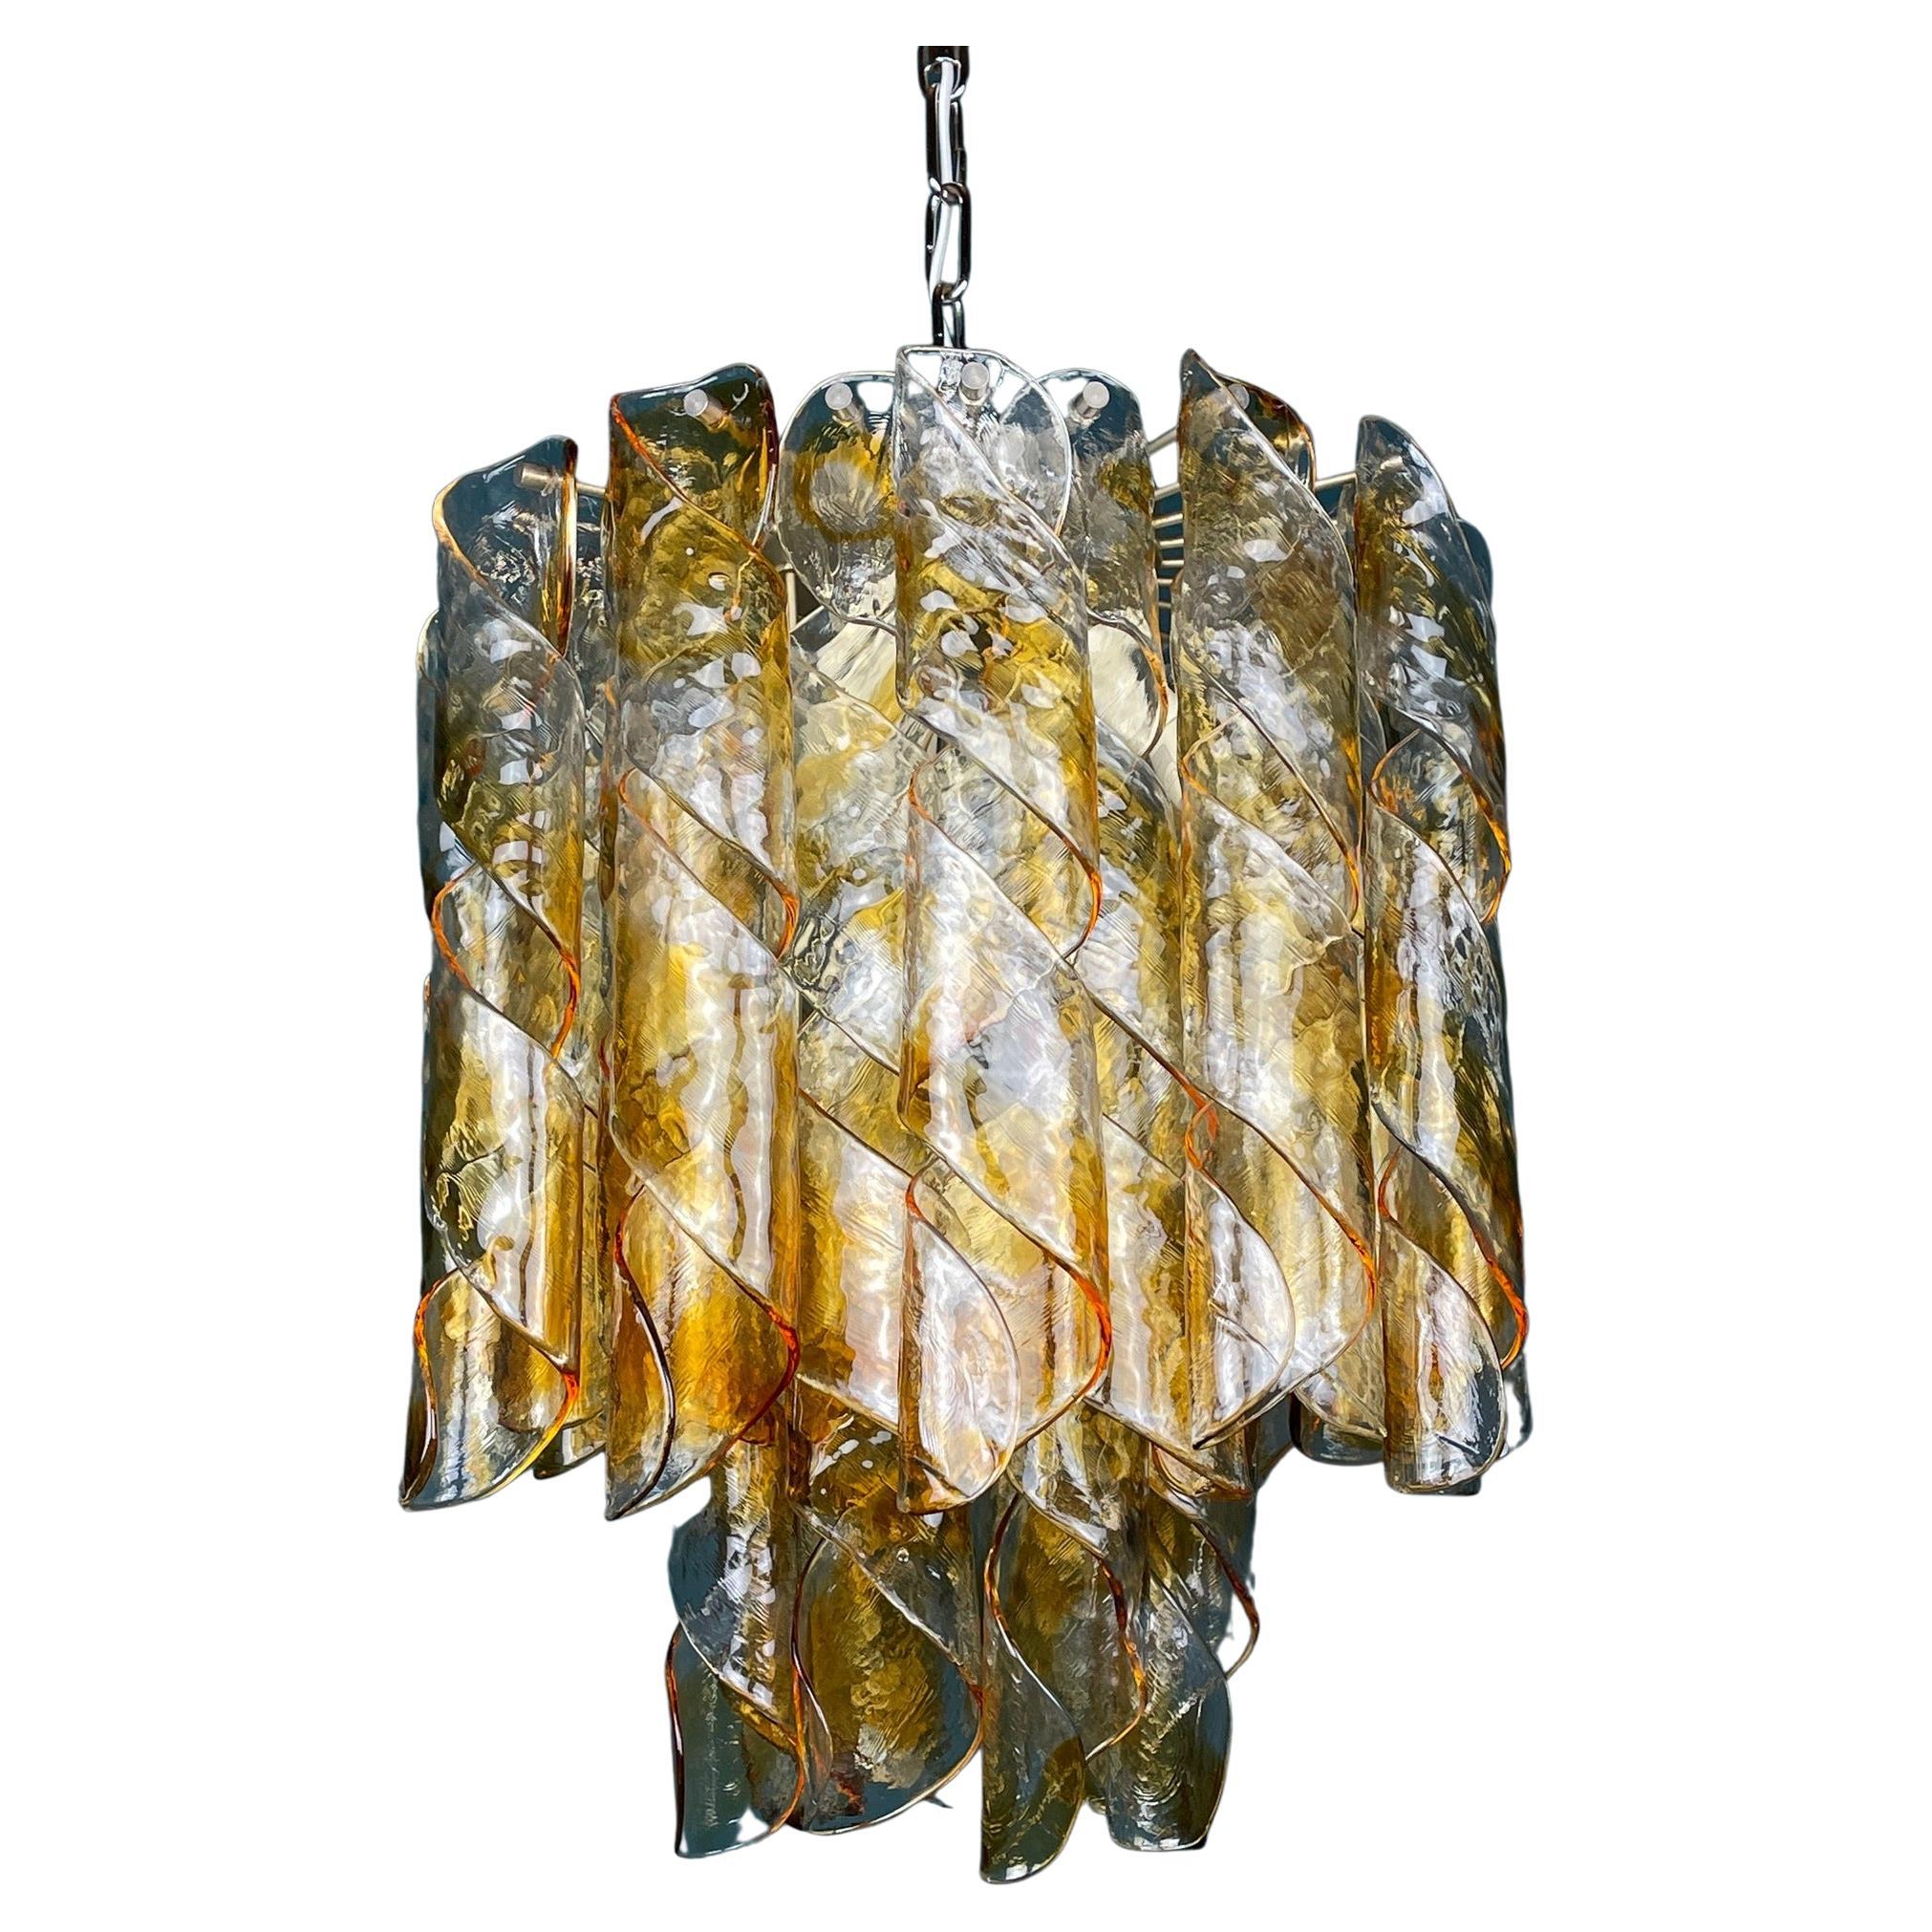 Vintage Large Murano Chandelier "Torciglioni" by Av Mazzega Italy 1970s For Sale